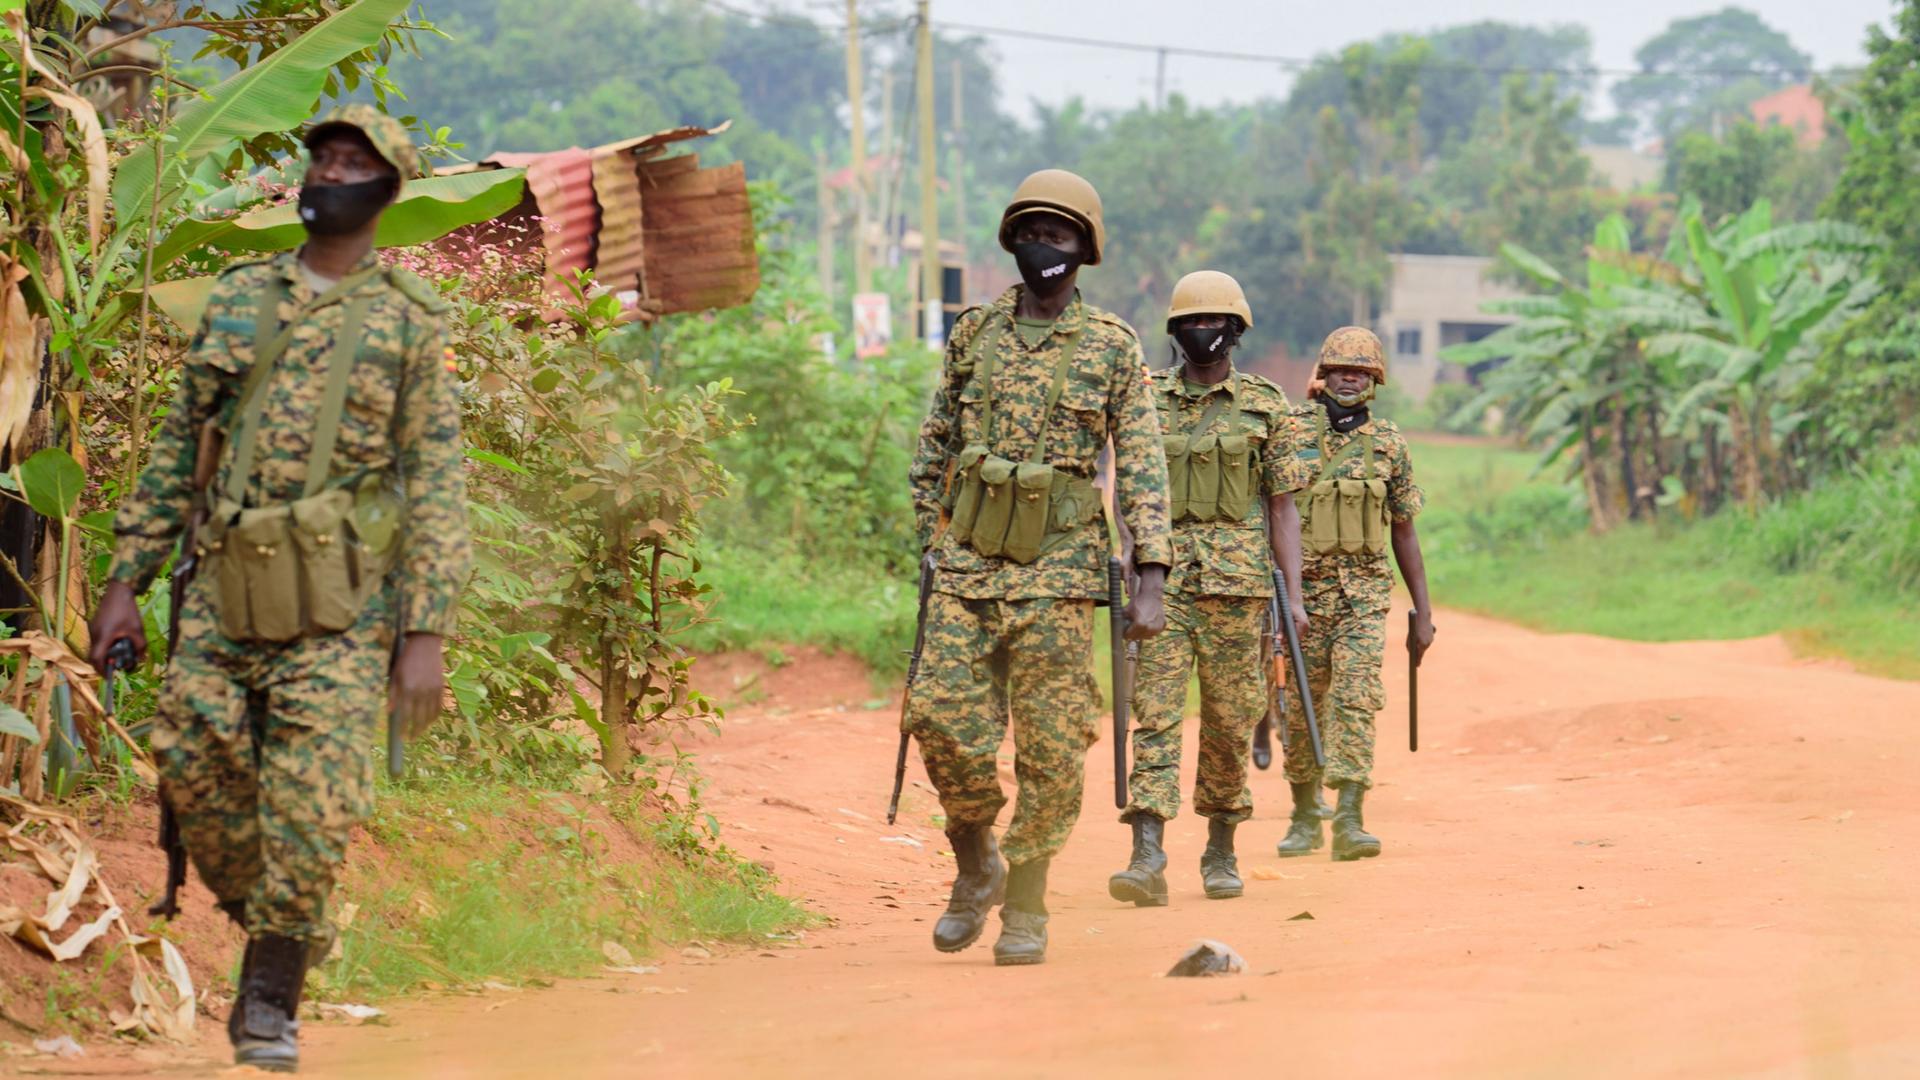 Four soldiers are shown wearing military fatigues and helmets while carrying weapons and walking in a dirt road.